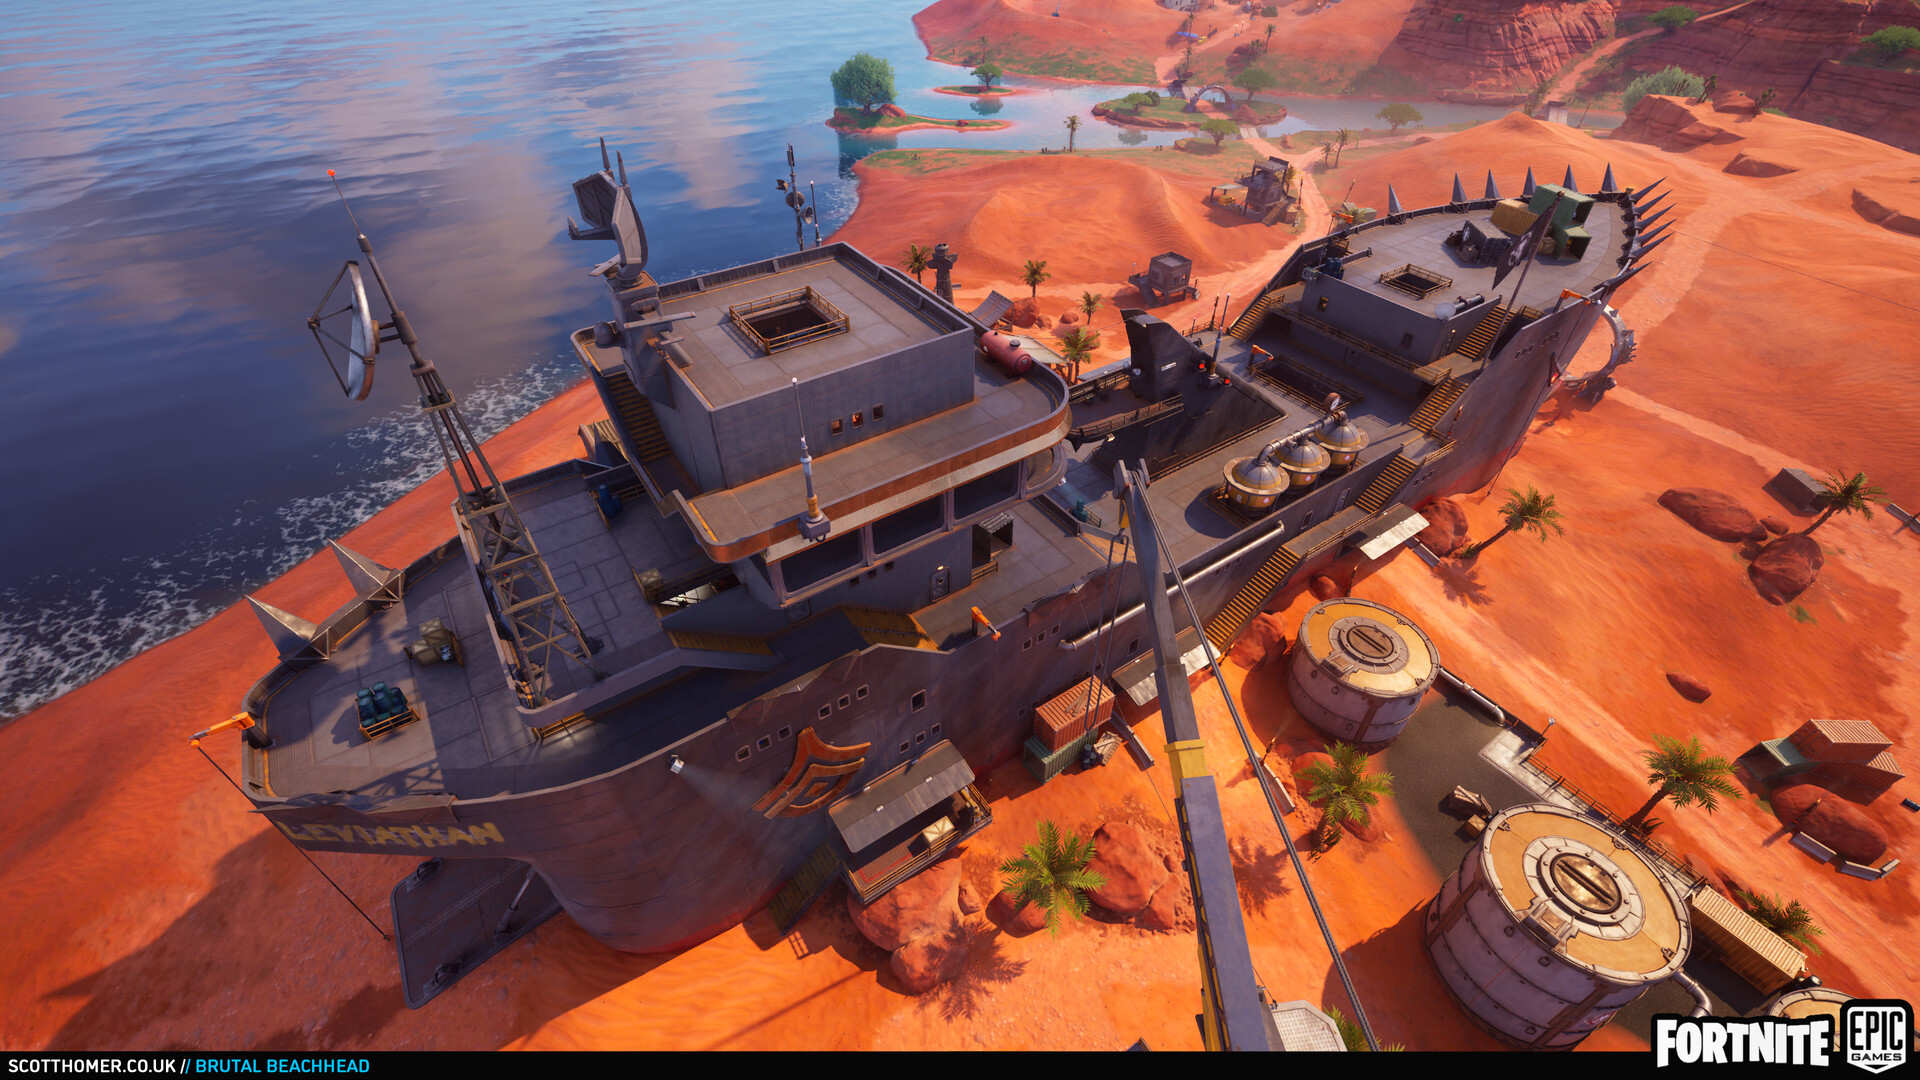 Vehicle Combat Takes Center Stage In Fortnite Wrecked (via Epic Games).